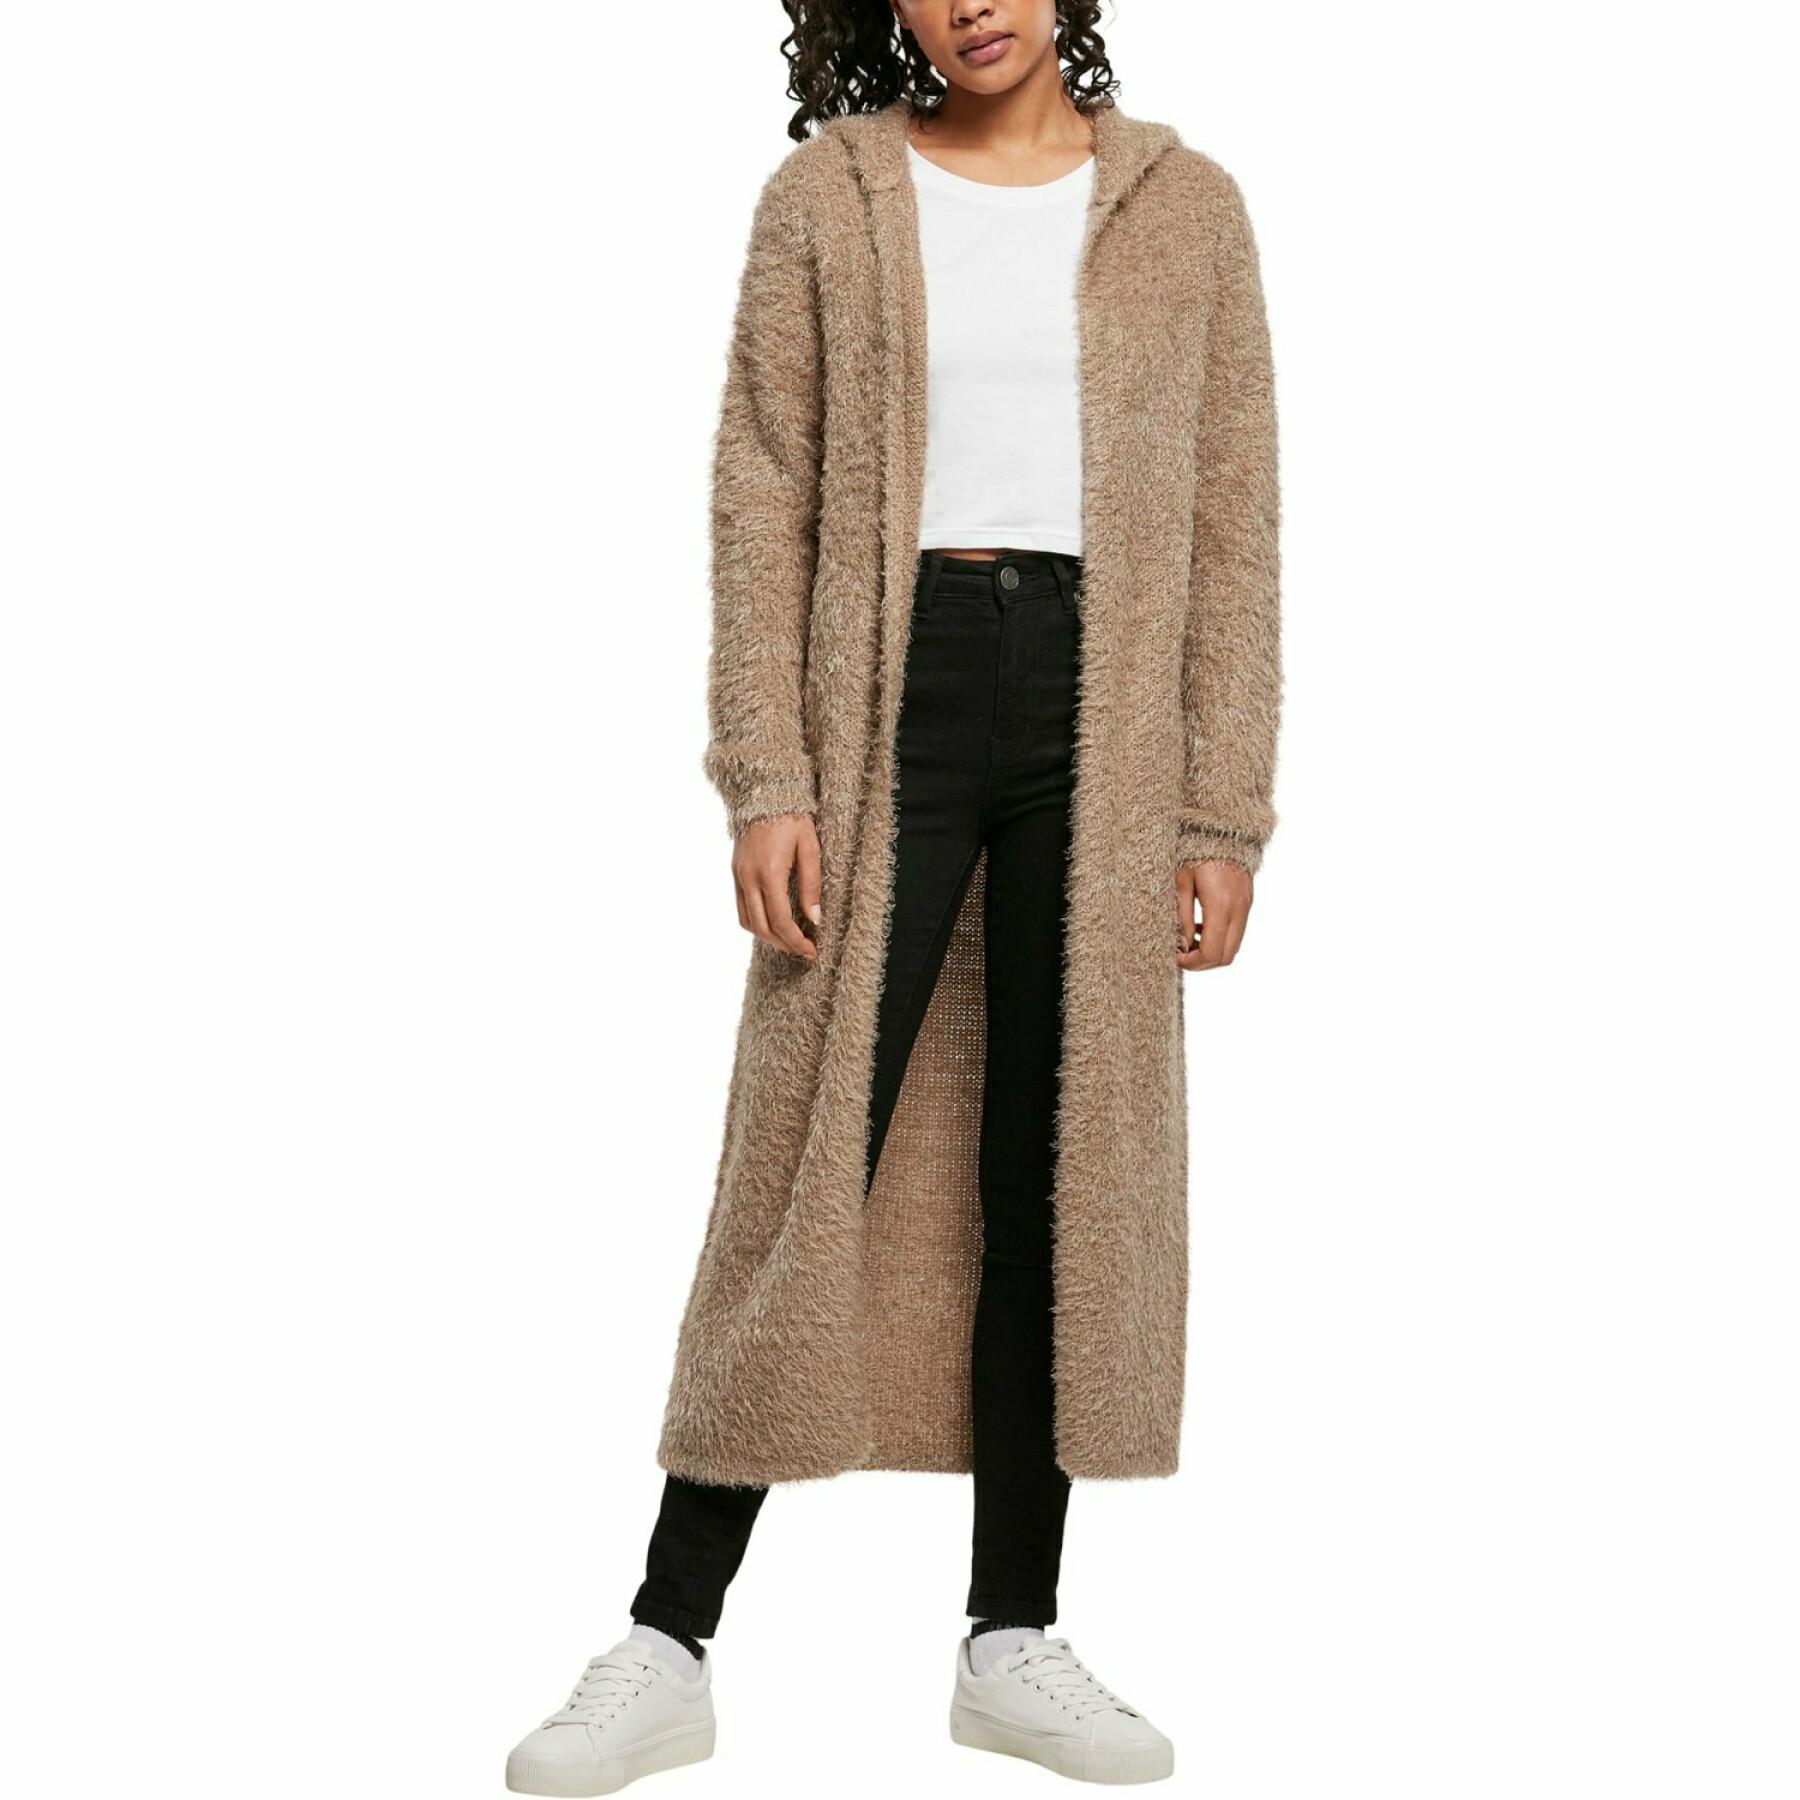 Women's long cardigan Urban Classics hooded feather-  large sizes